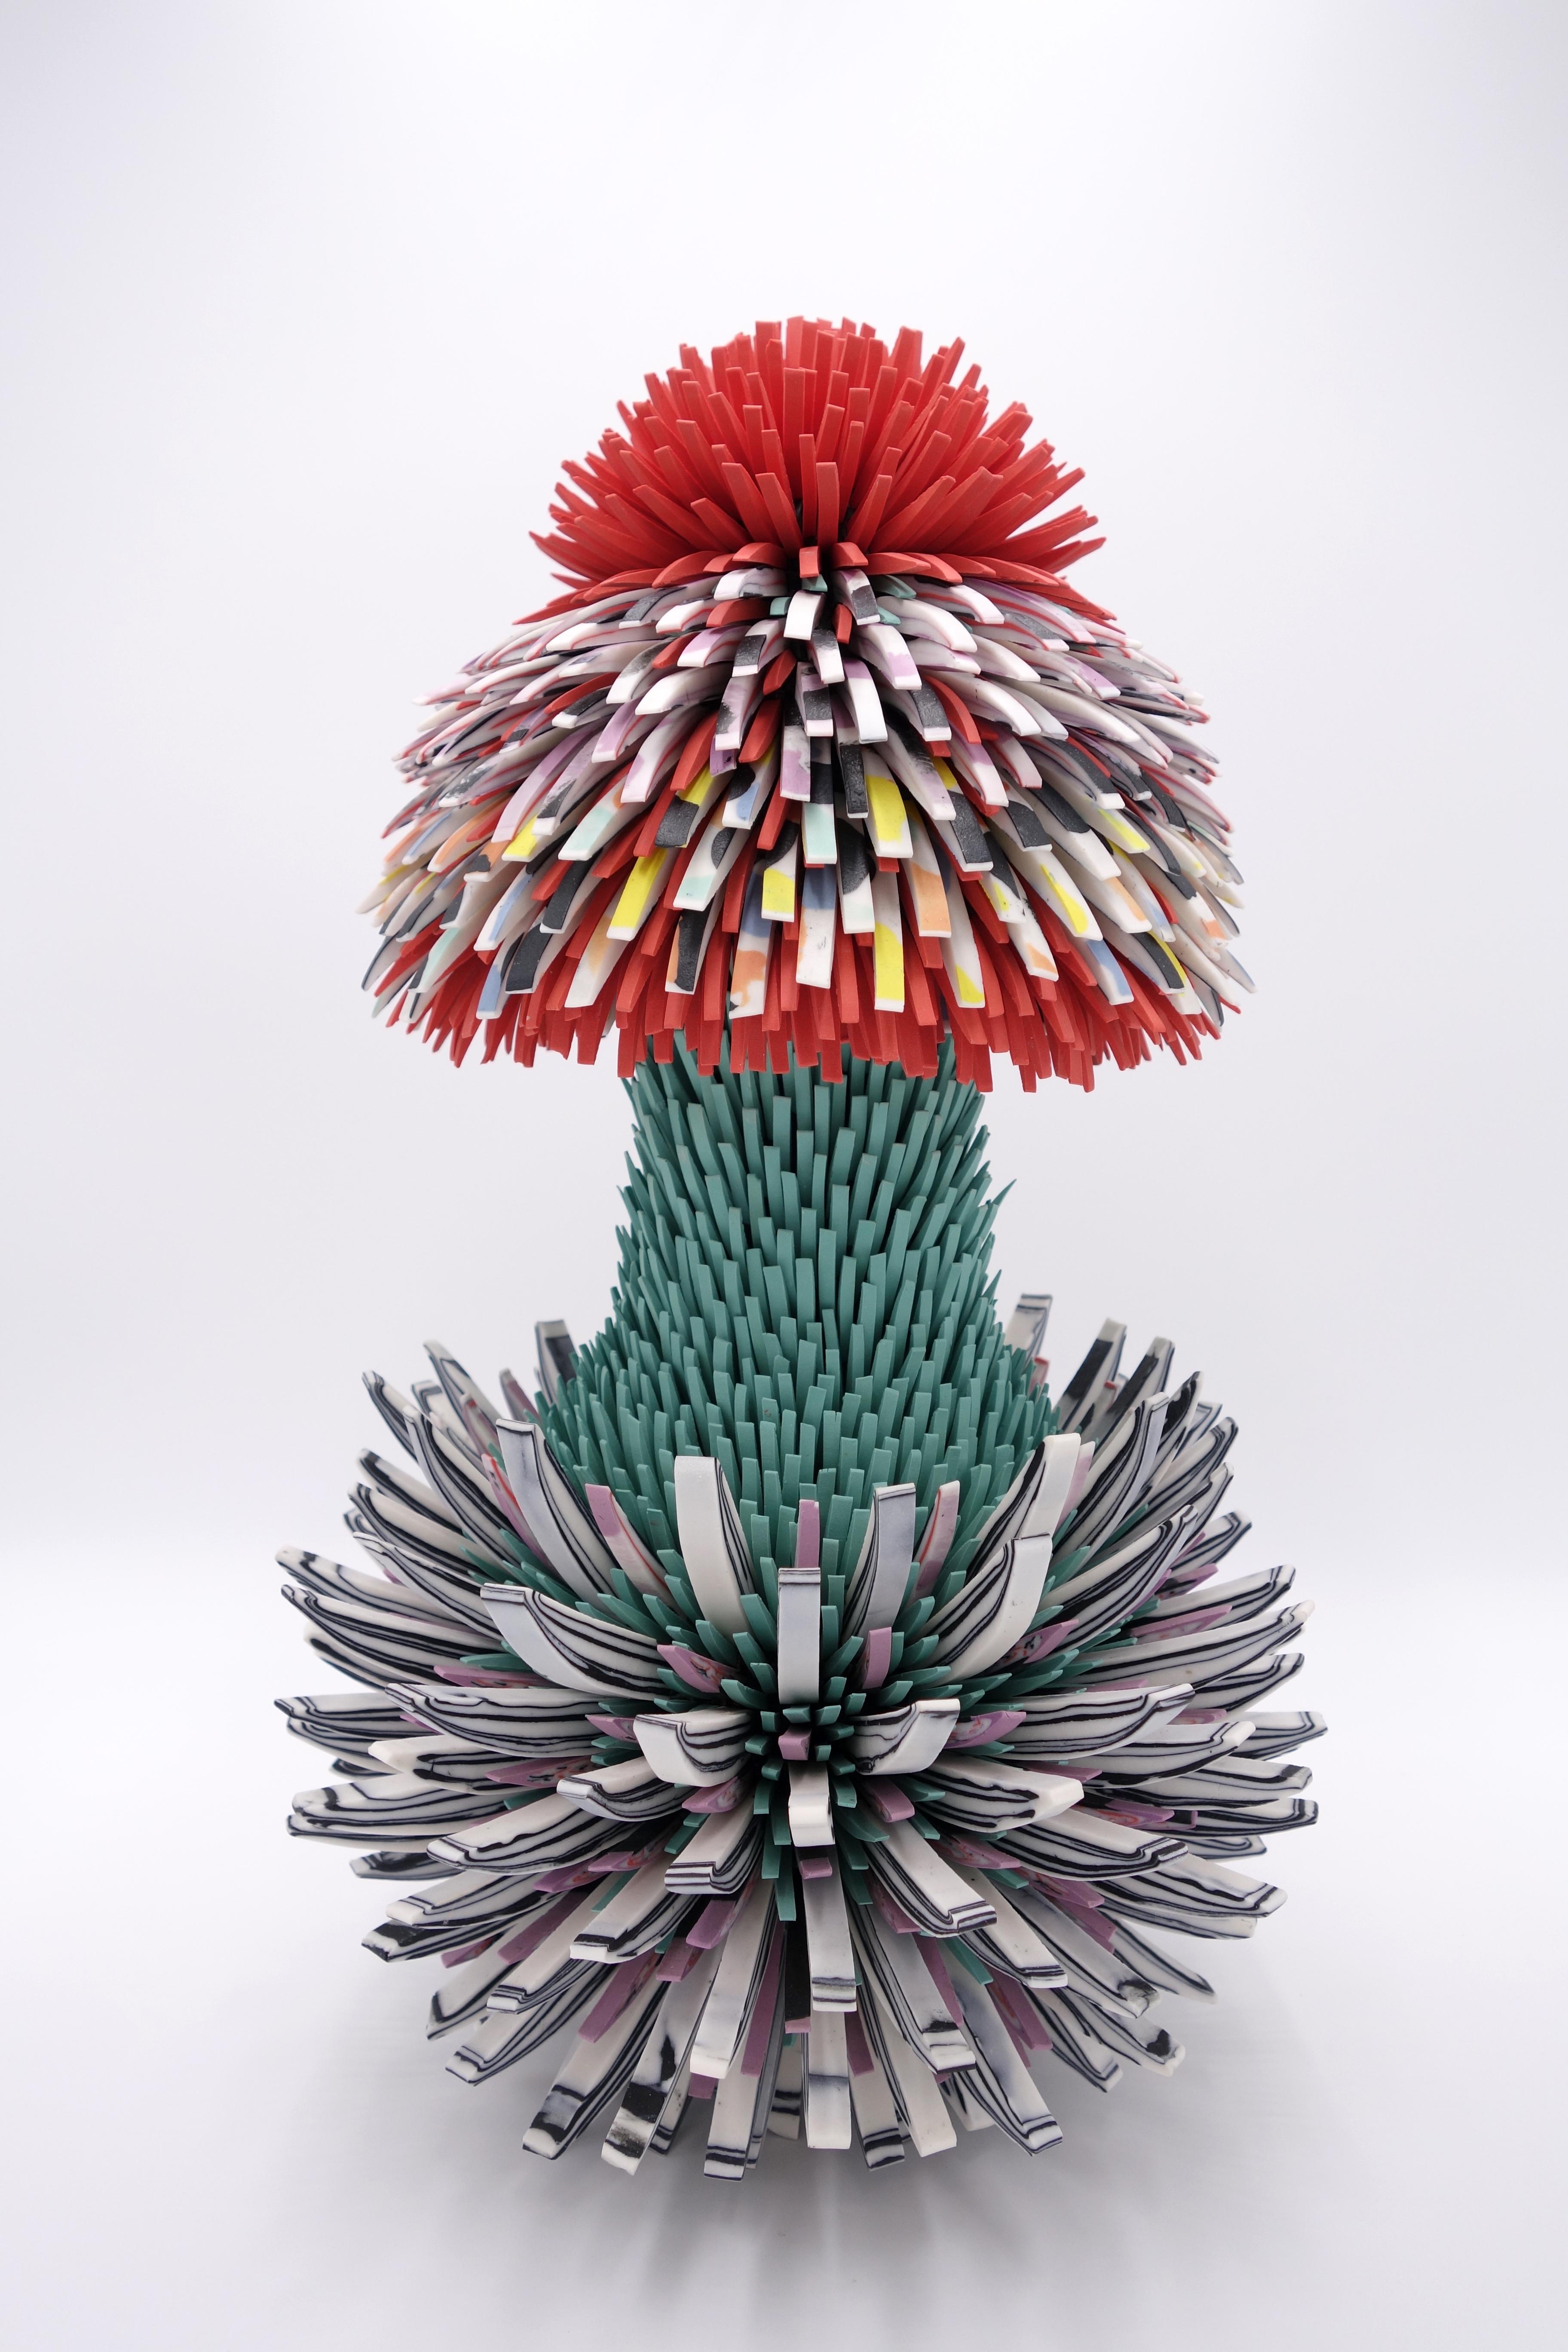 Zemer Peled Abstract Sculpture - "Protea 2", Contemporary, Porcelain, Abstract, Ceramic, Sculpture